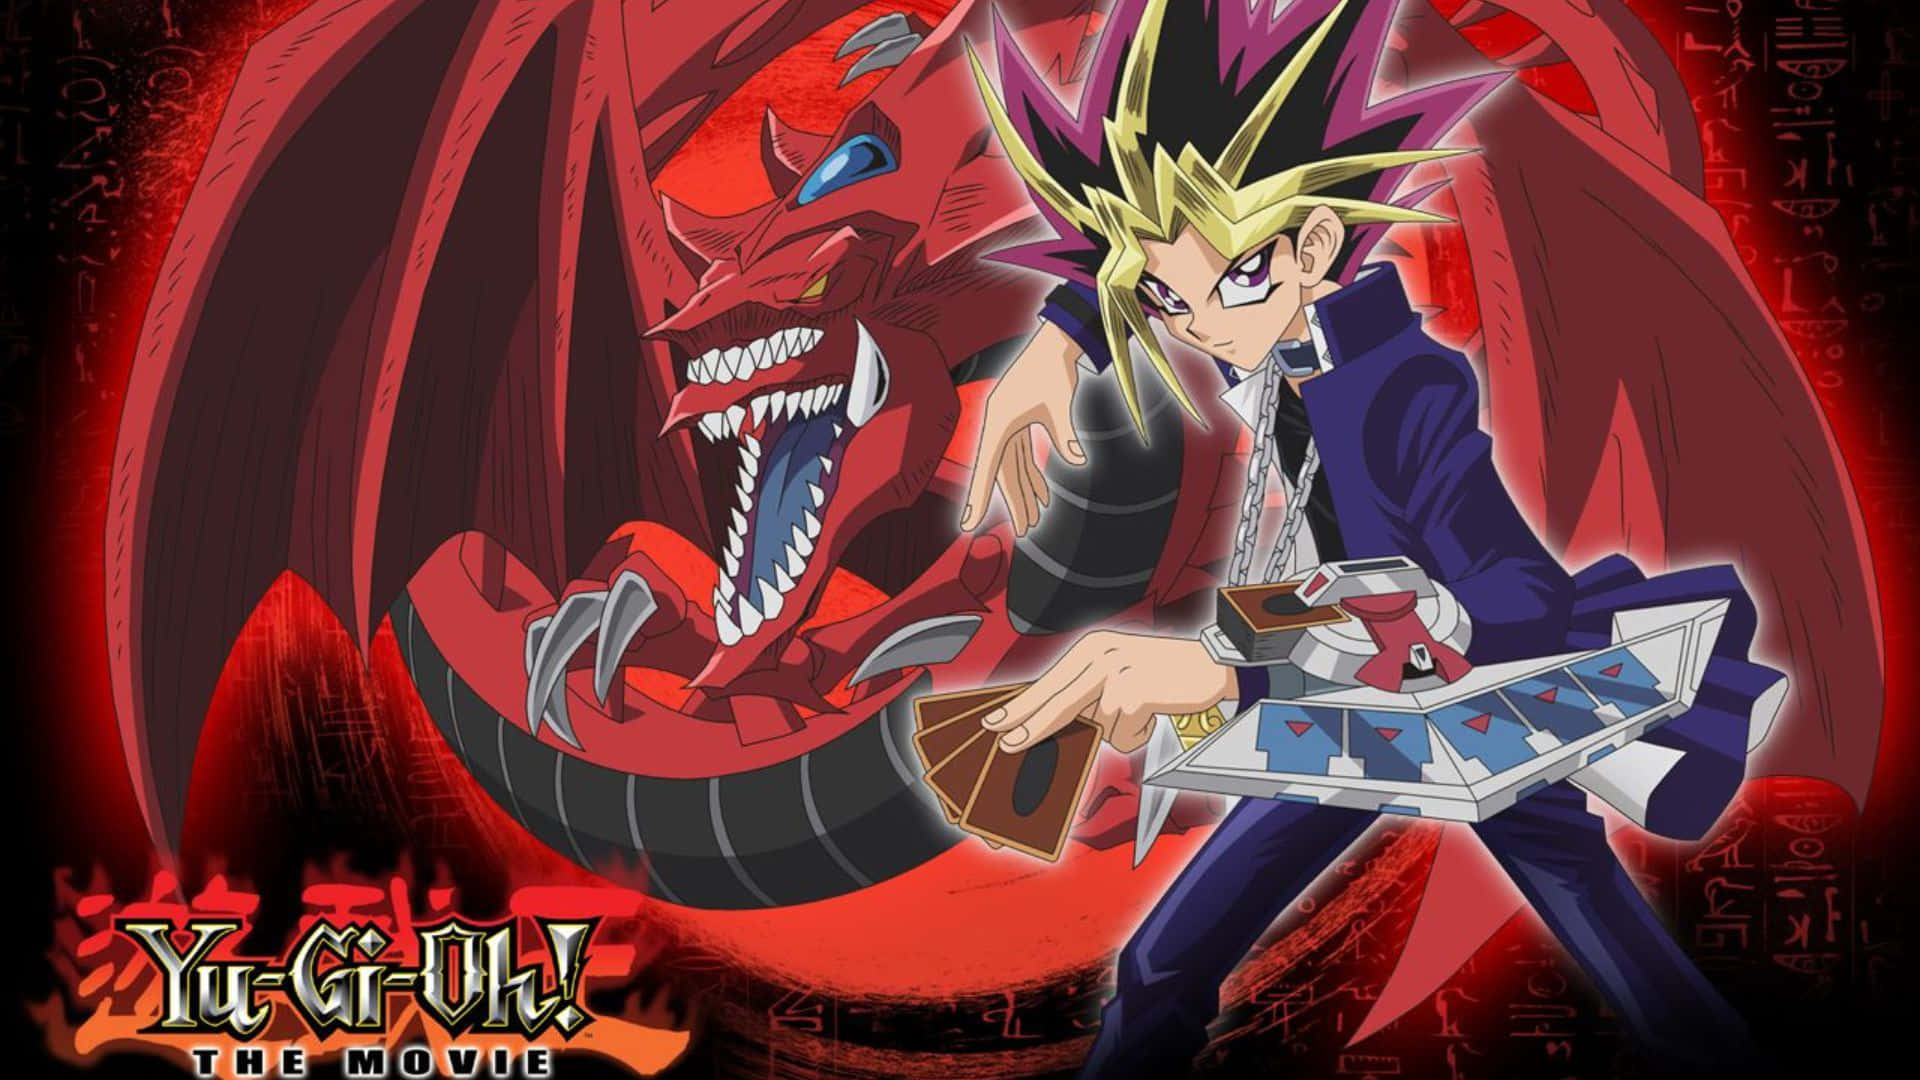 Duel your way to victory with Yugioh cards!